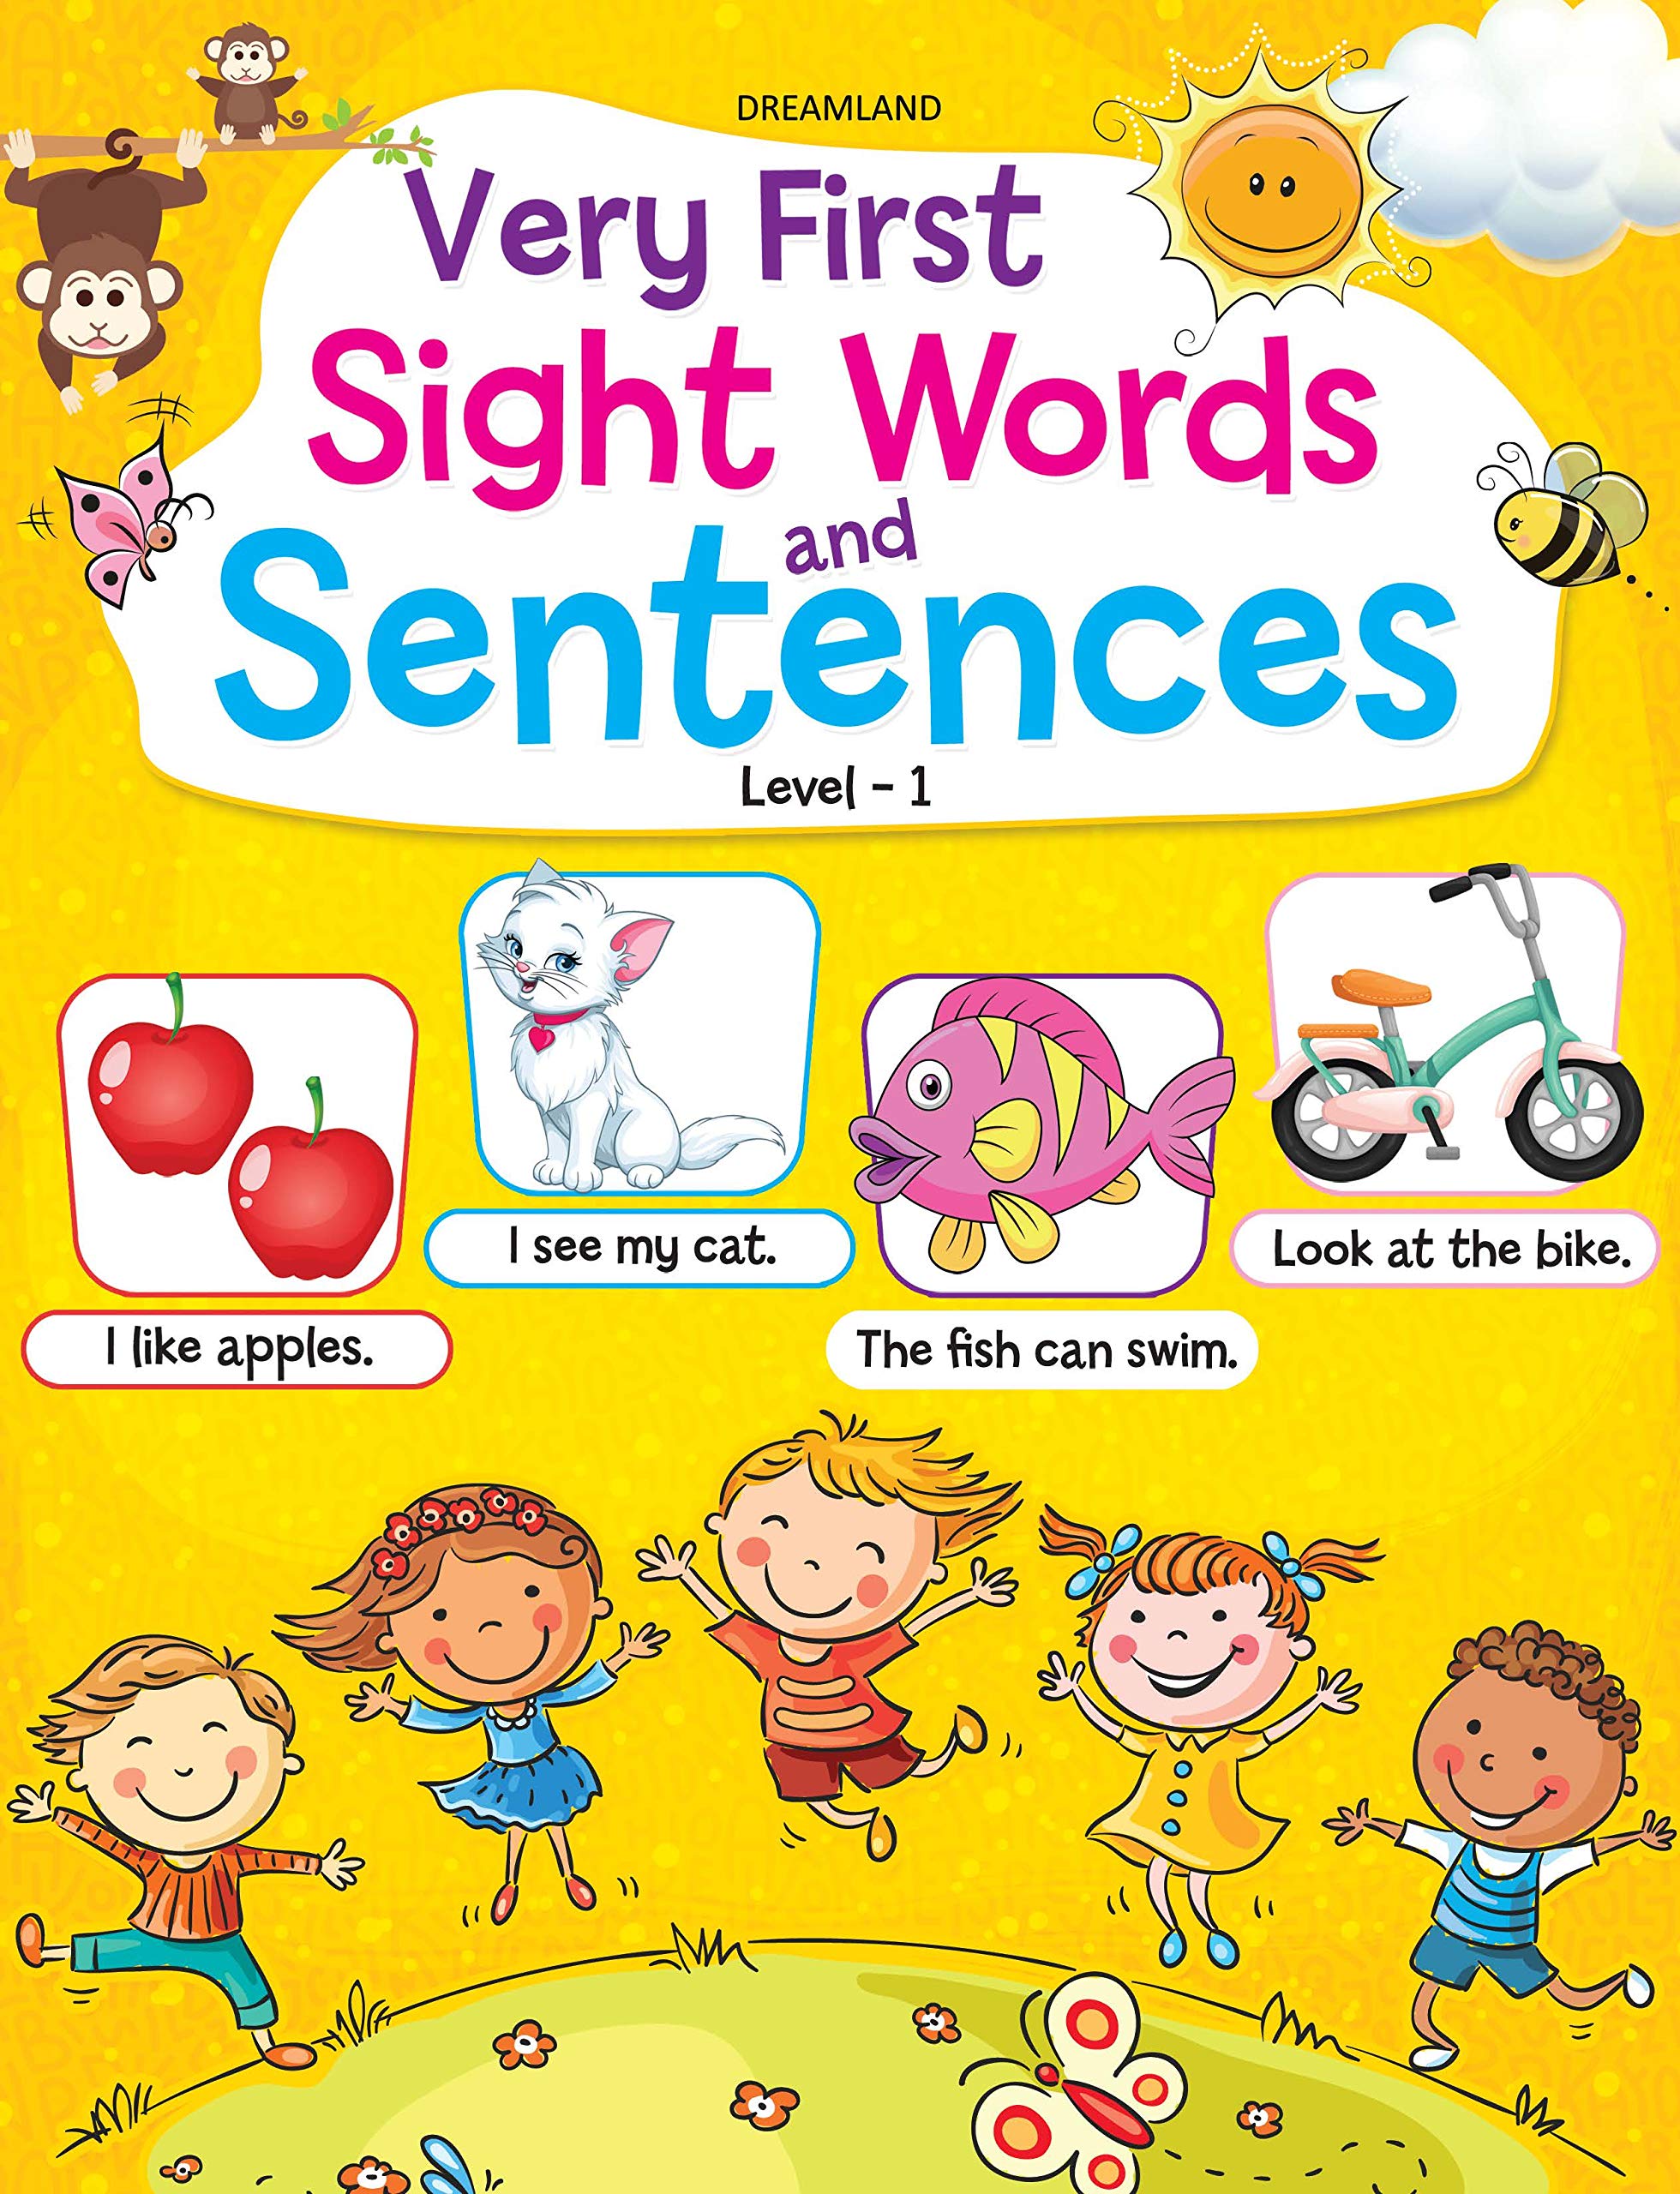 Very First Sight Words Sentences Level - 1 